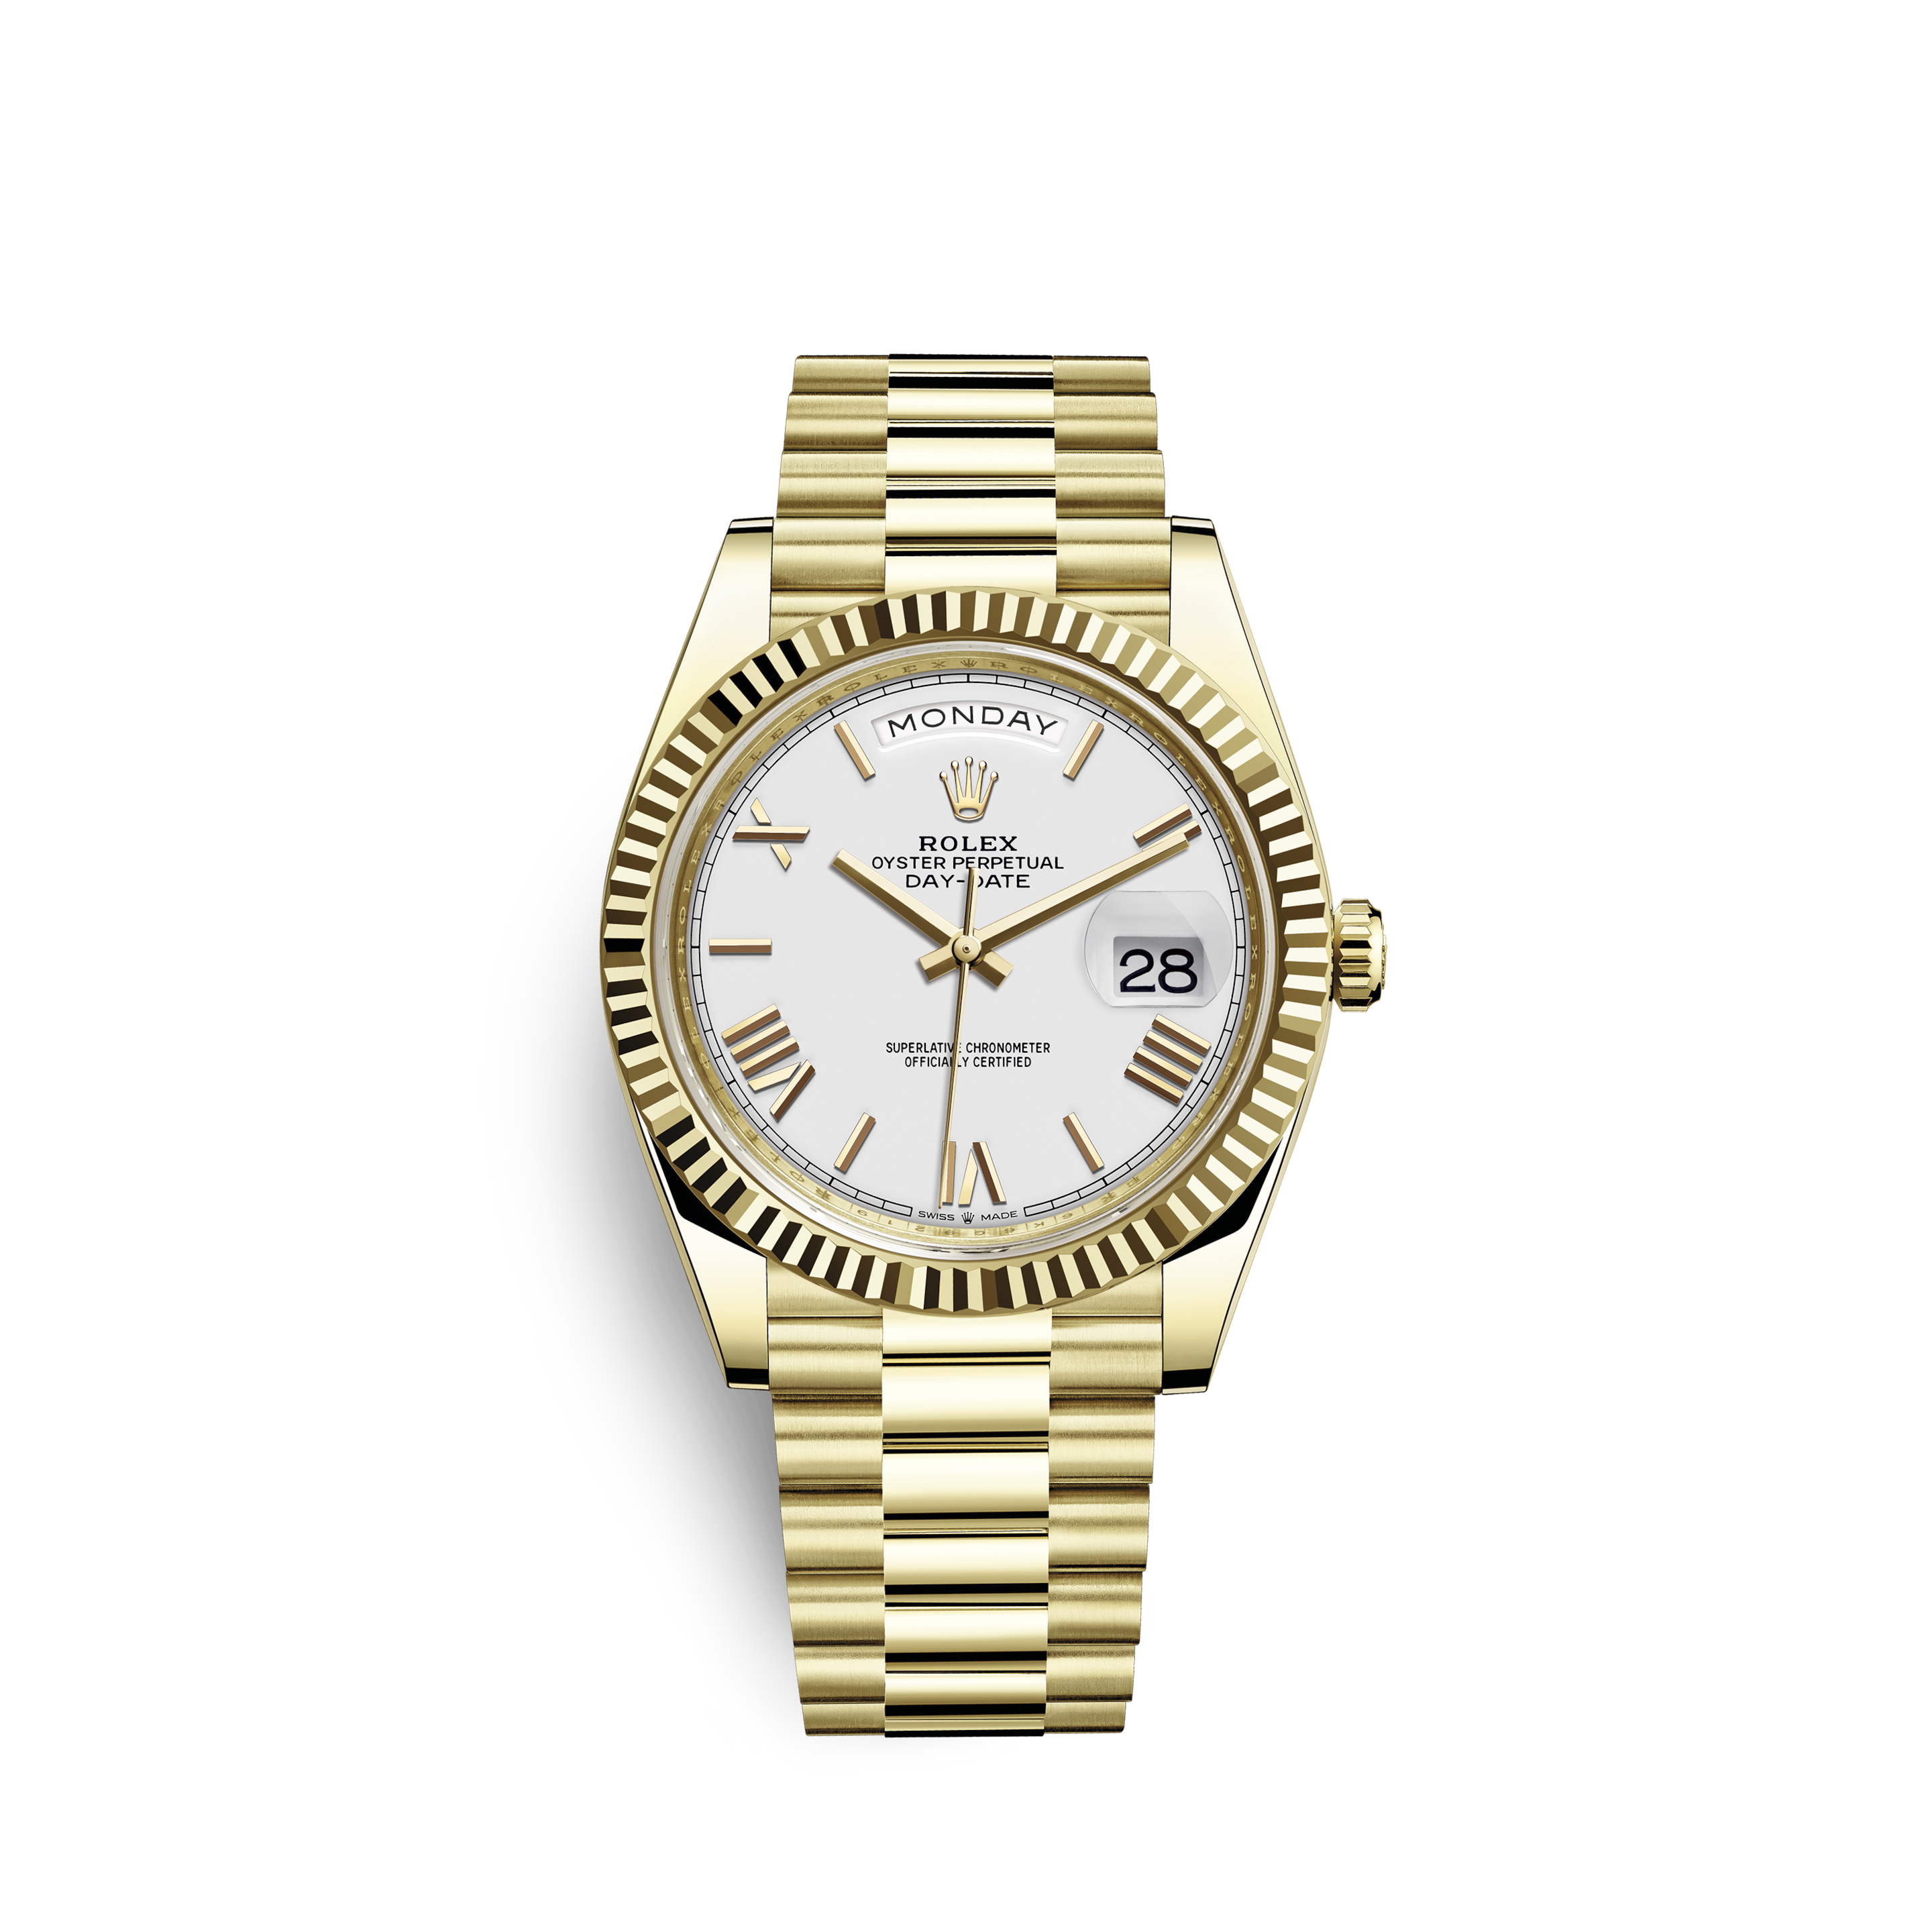 Rolex Datejust 31mm Yellow Gold 278288rbr Champagne Diamond PresidentRolex Datejust 31mm Yellow Gold 278288rbr Diamond Pave President